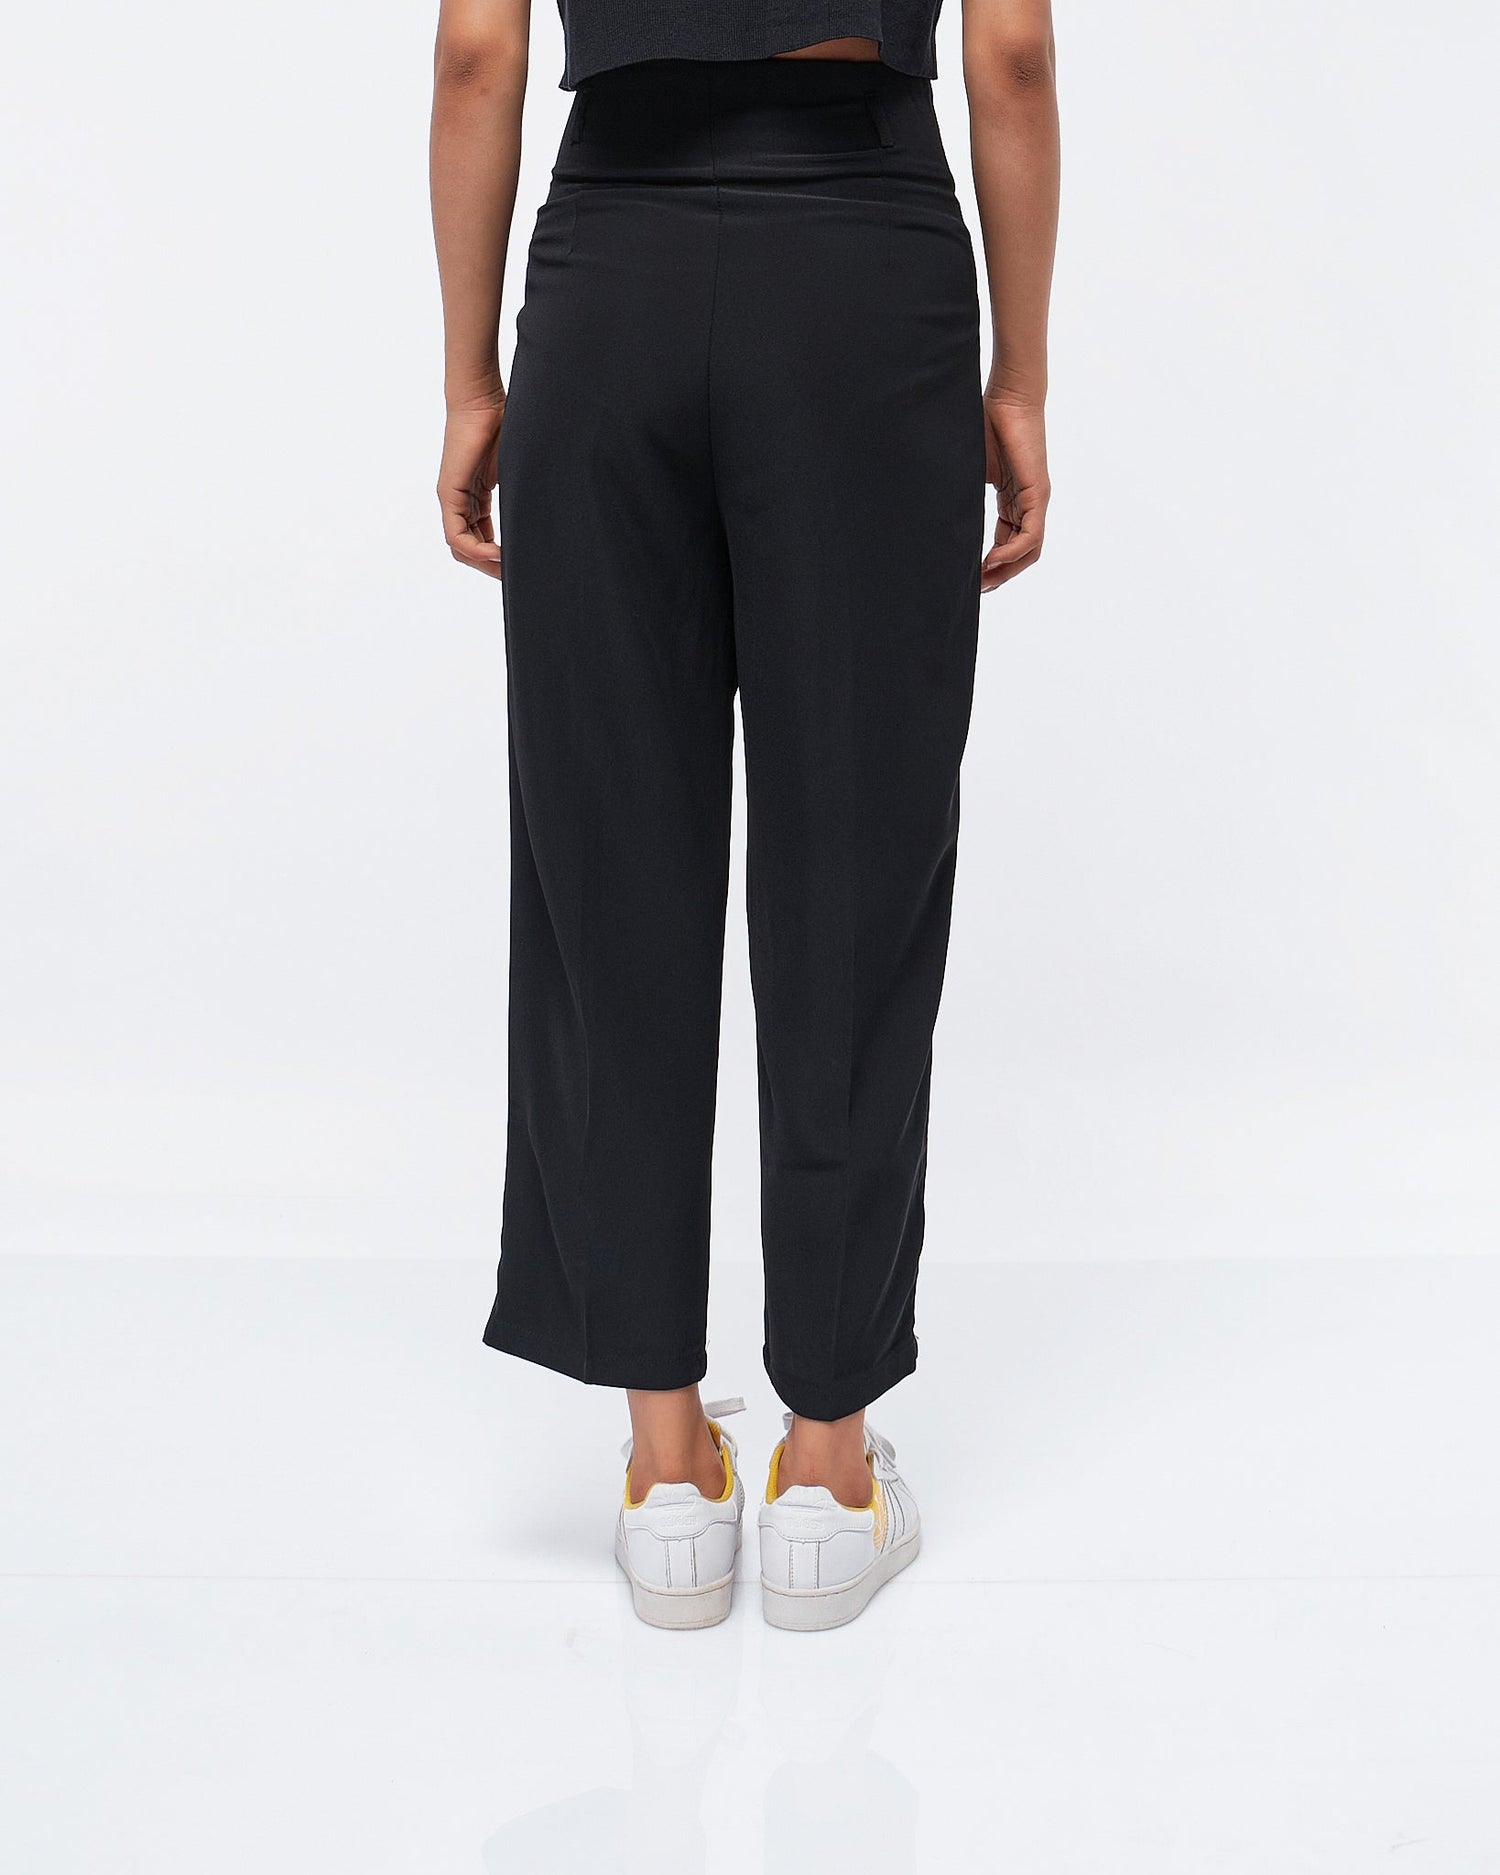 MOI OUTFIT-High Waist Loose Fit Lady Pants 22.90